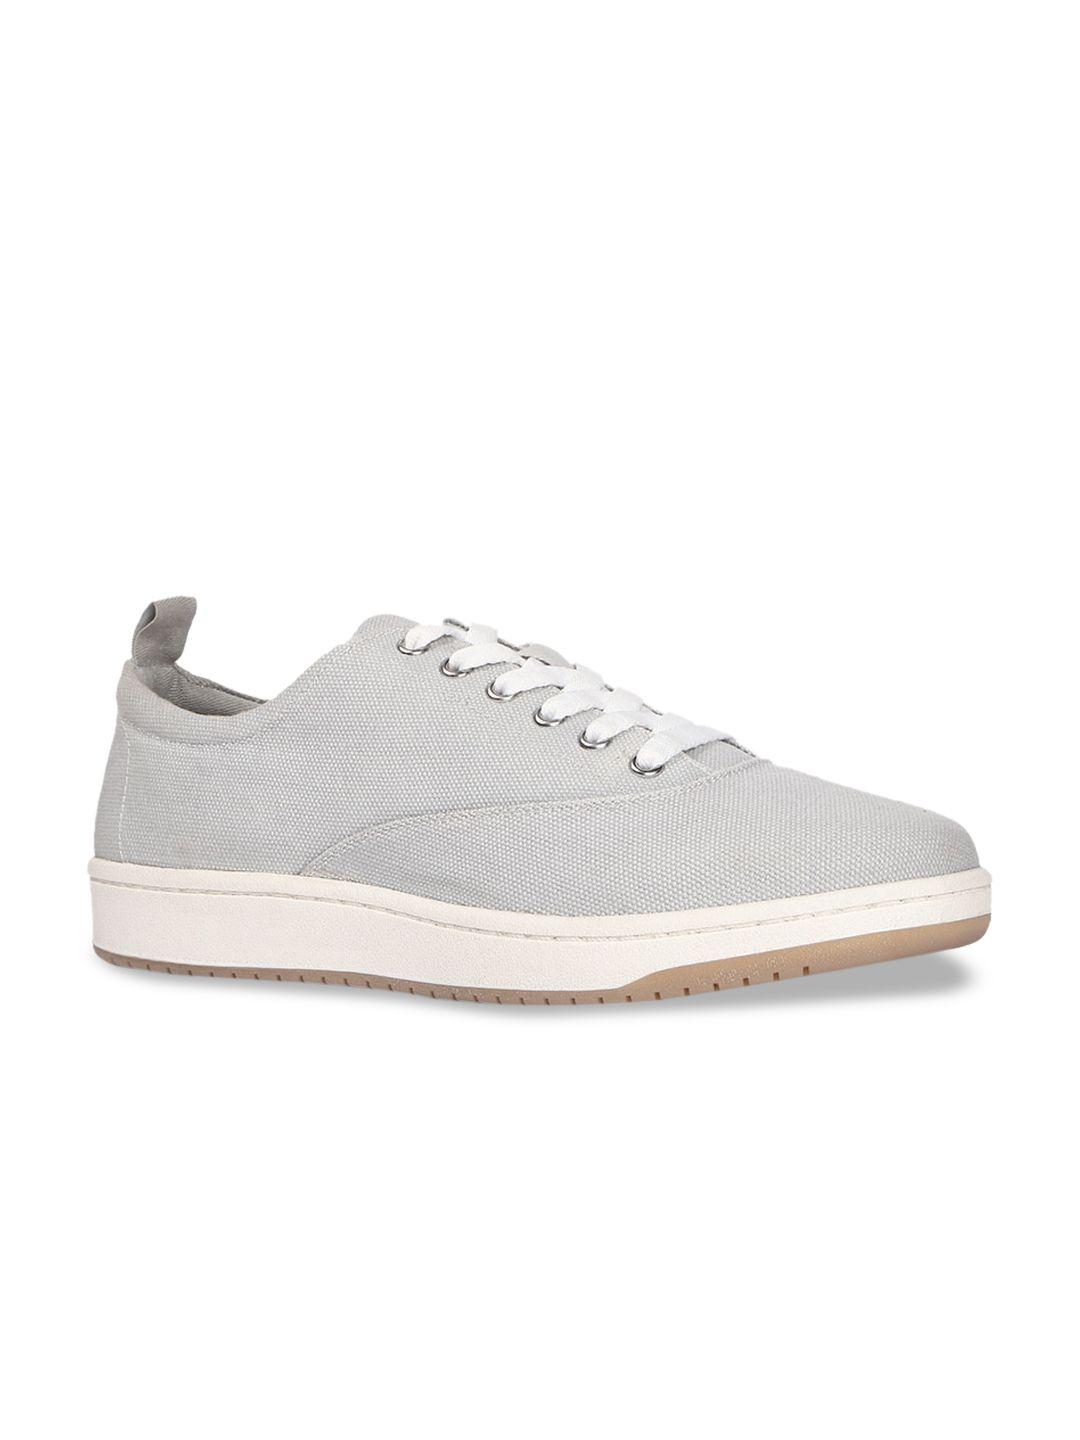 forever 21 men grey sneakers casual shoes